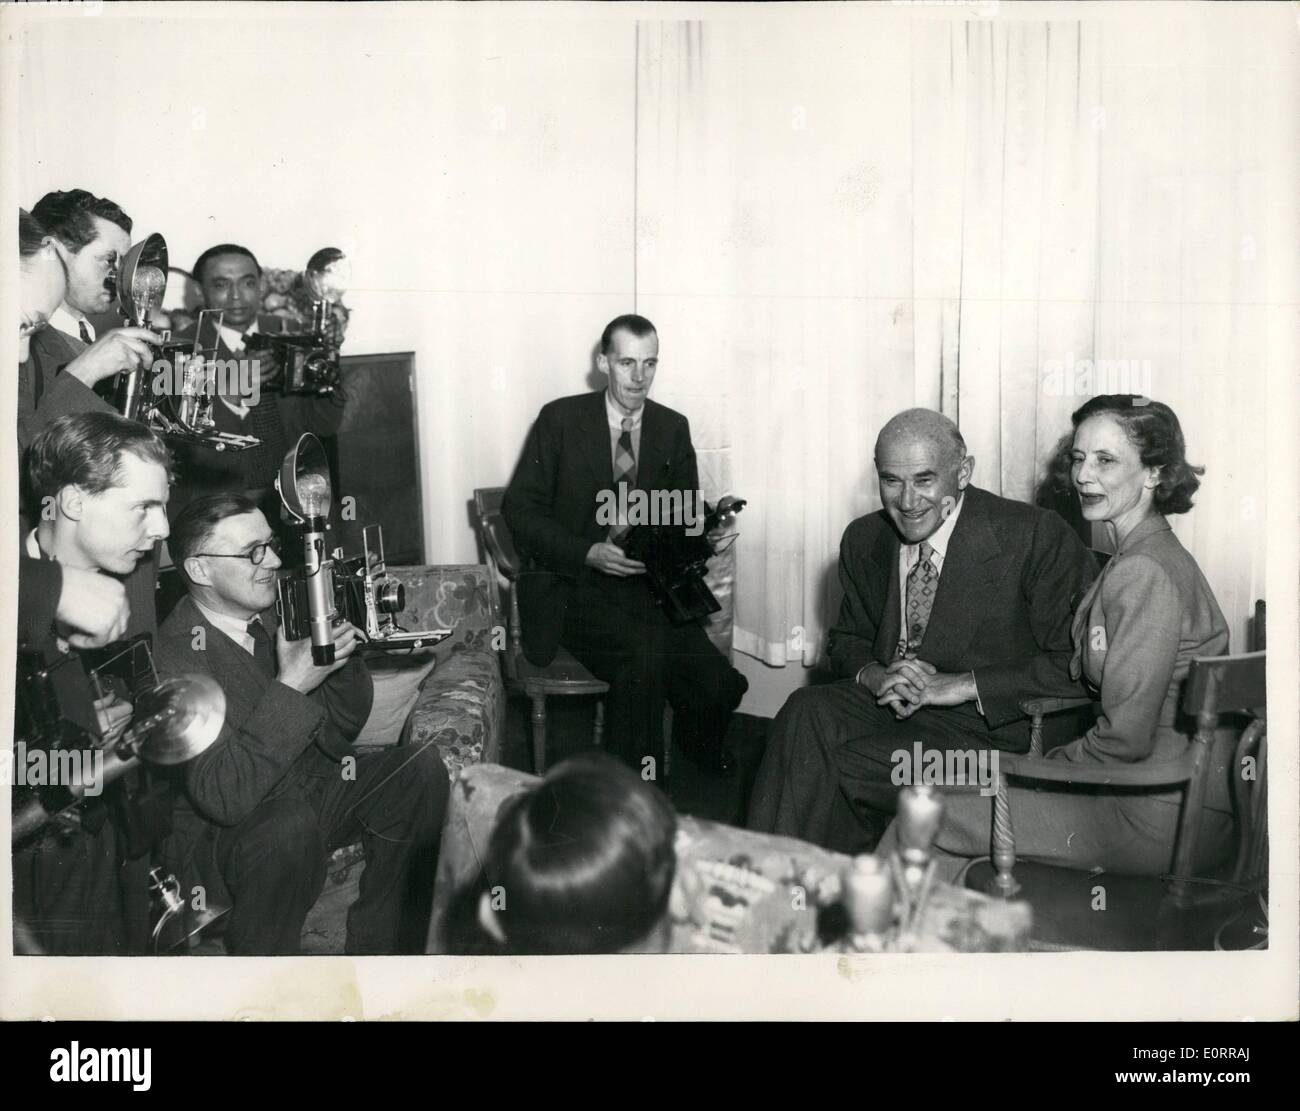 May 05, 1960 - Sam Goldwyn Holds A Press Reception... 28-4-53 He Faces The Cameras: Sam Goldwyn the American film producer who is now 70 years of age - arrived in London today and held a press reception at Claridges Hotel this afternoon. He was accompanied by his wife, Francois.. Photo shows Sam Goldwyn - for a change-faces the cameras himself -during the press conference this afternoon. Mrs Goldwyn is seen with him. Stock Photo